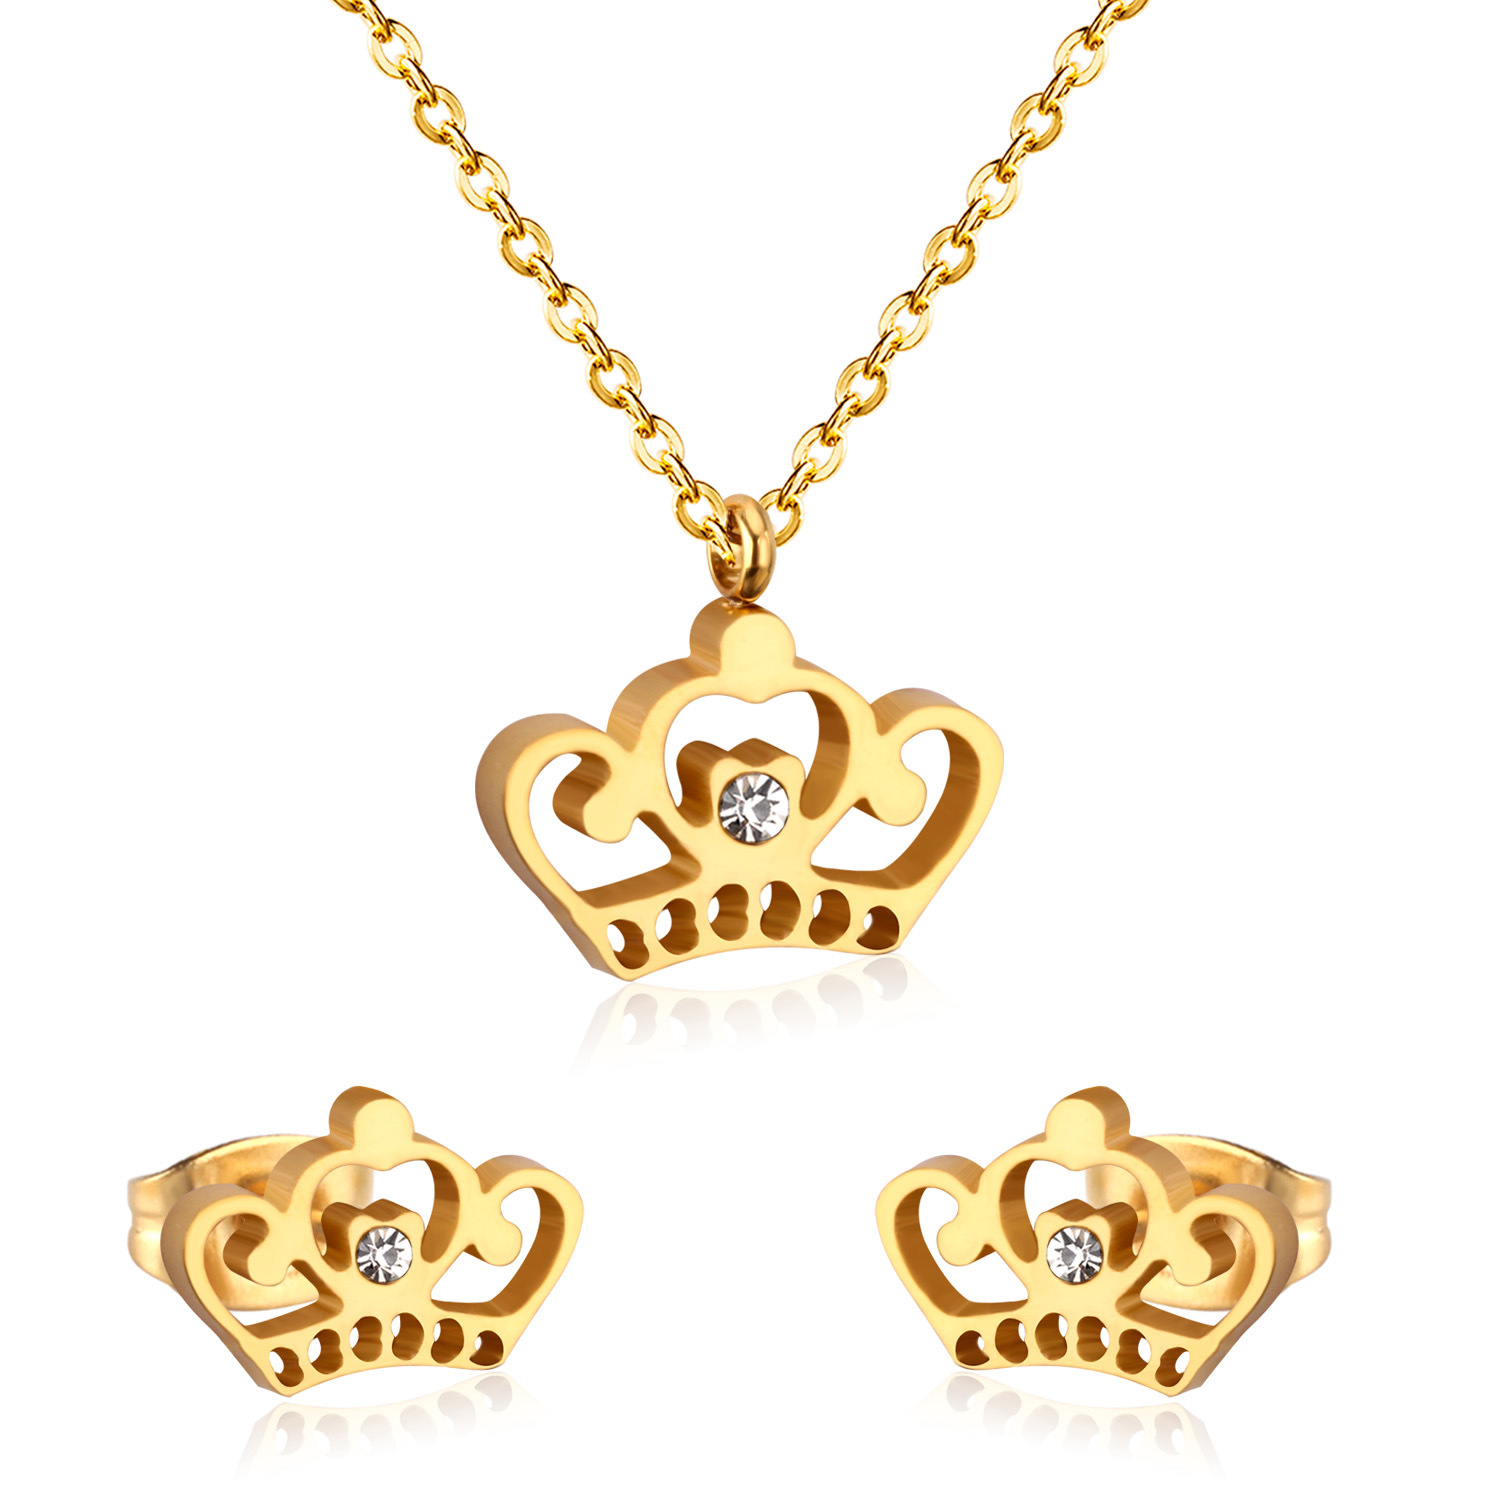 2:Gold Glossy Crown with Diamonds